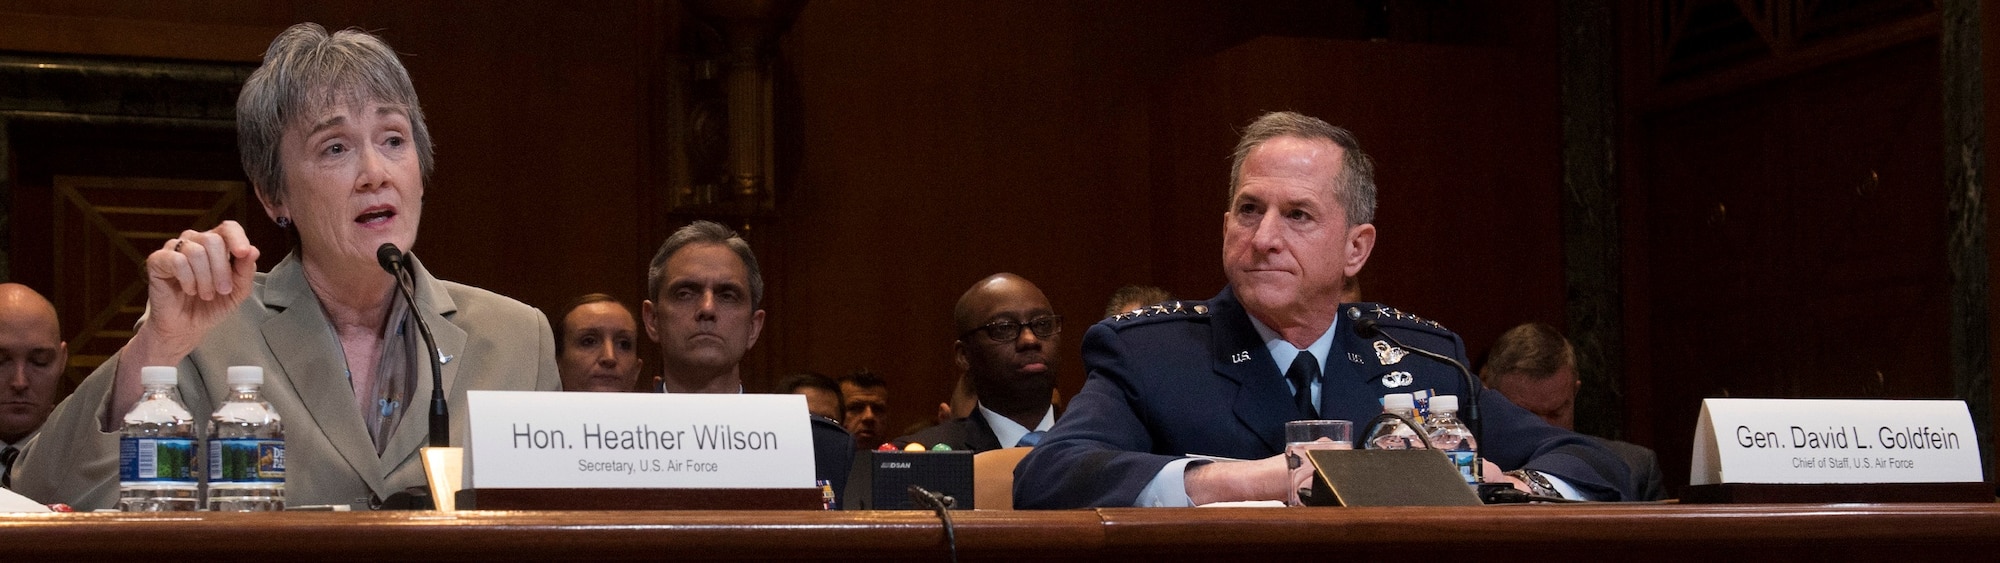 Secretary of the Air Force Heather Wilson and Air Force Chief of Staff Gen. David L. Goldfein testify during a Senate Appropriations Committee hearing on the fiscal year 2020 funding request and budget justification for the Department of the Air Force in Washington, D.C., March 13, 2019.